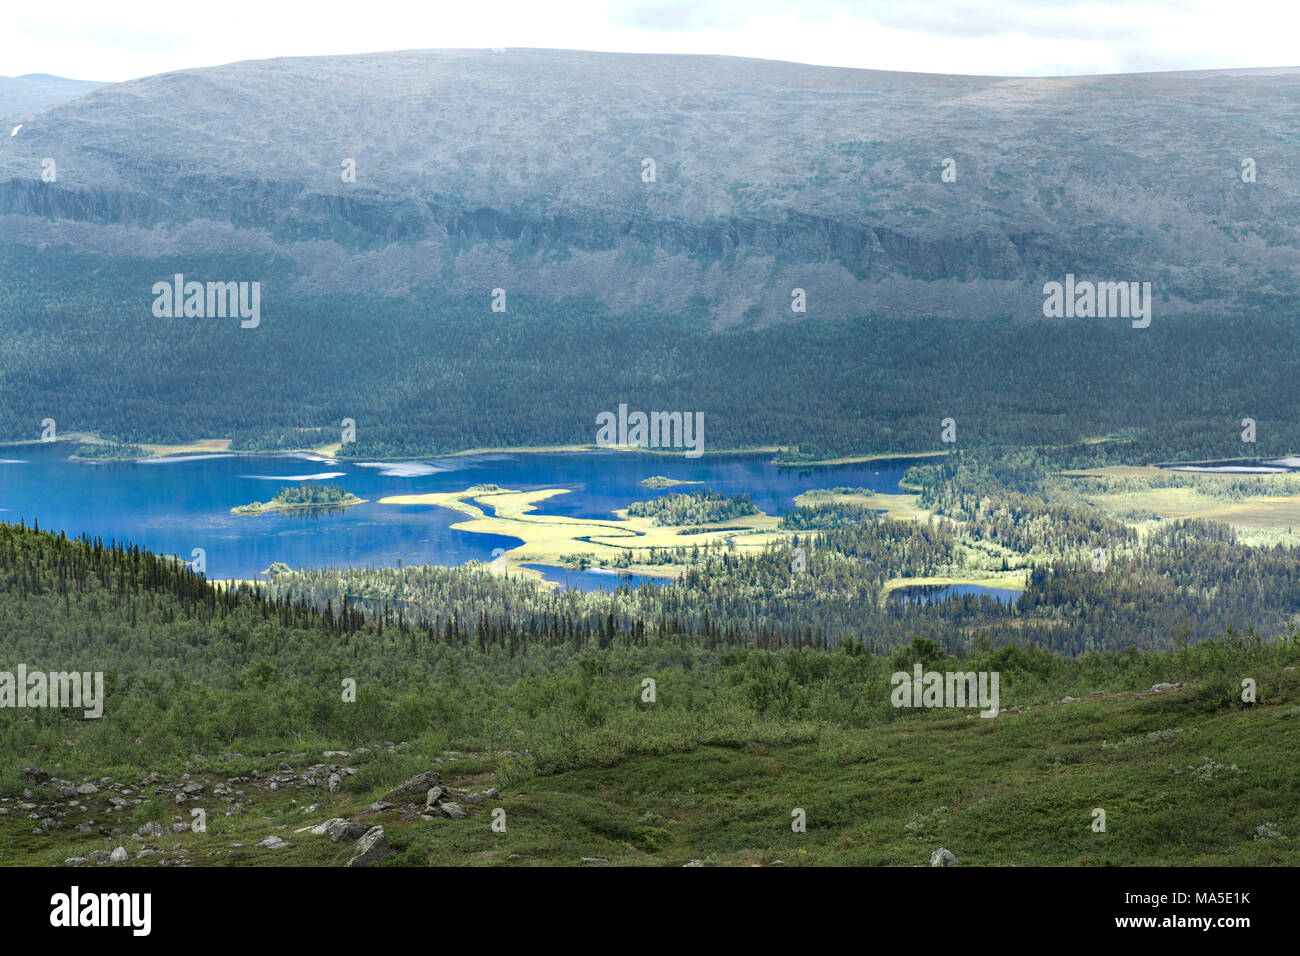 View from Kungsleden (King's Trail) on the Rittak lake and the Kvikkjokk nature reserve in Sarek National Park, Sweden Stock Photo